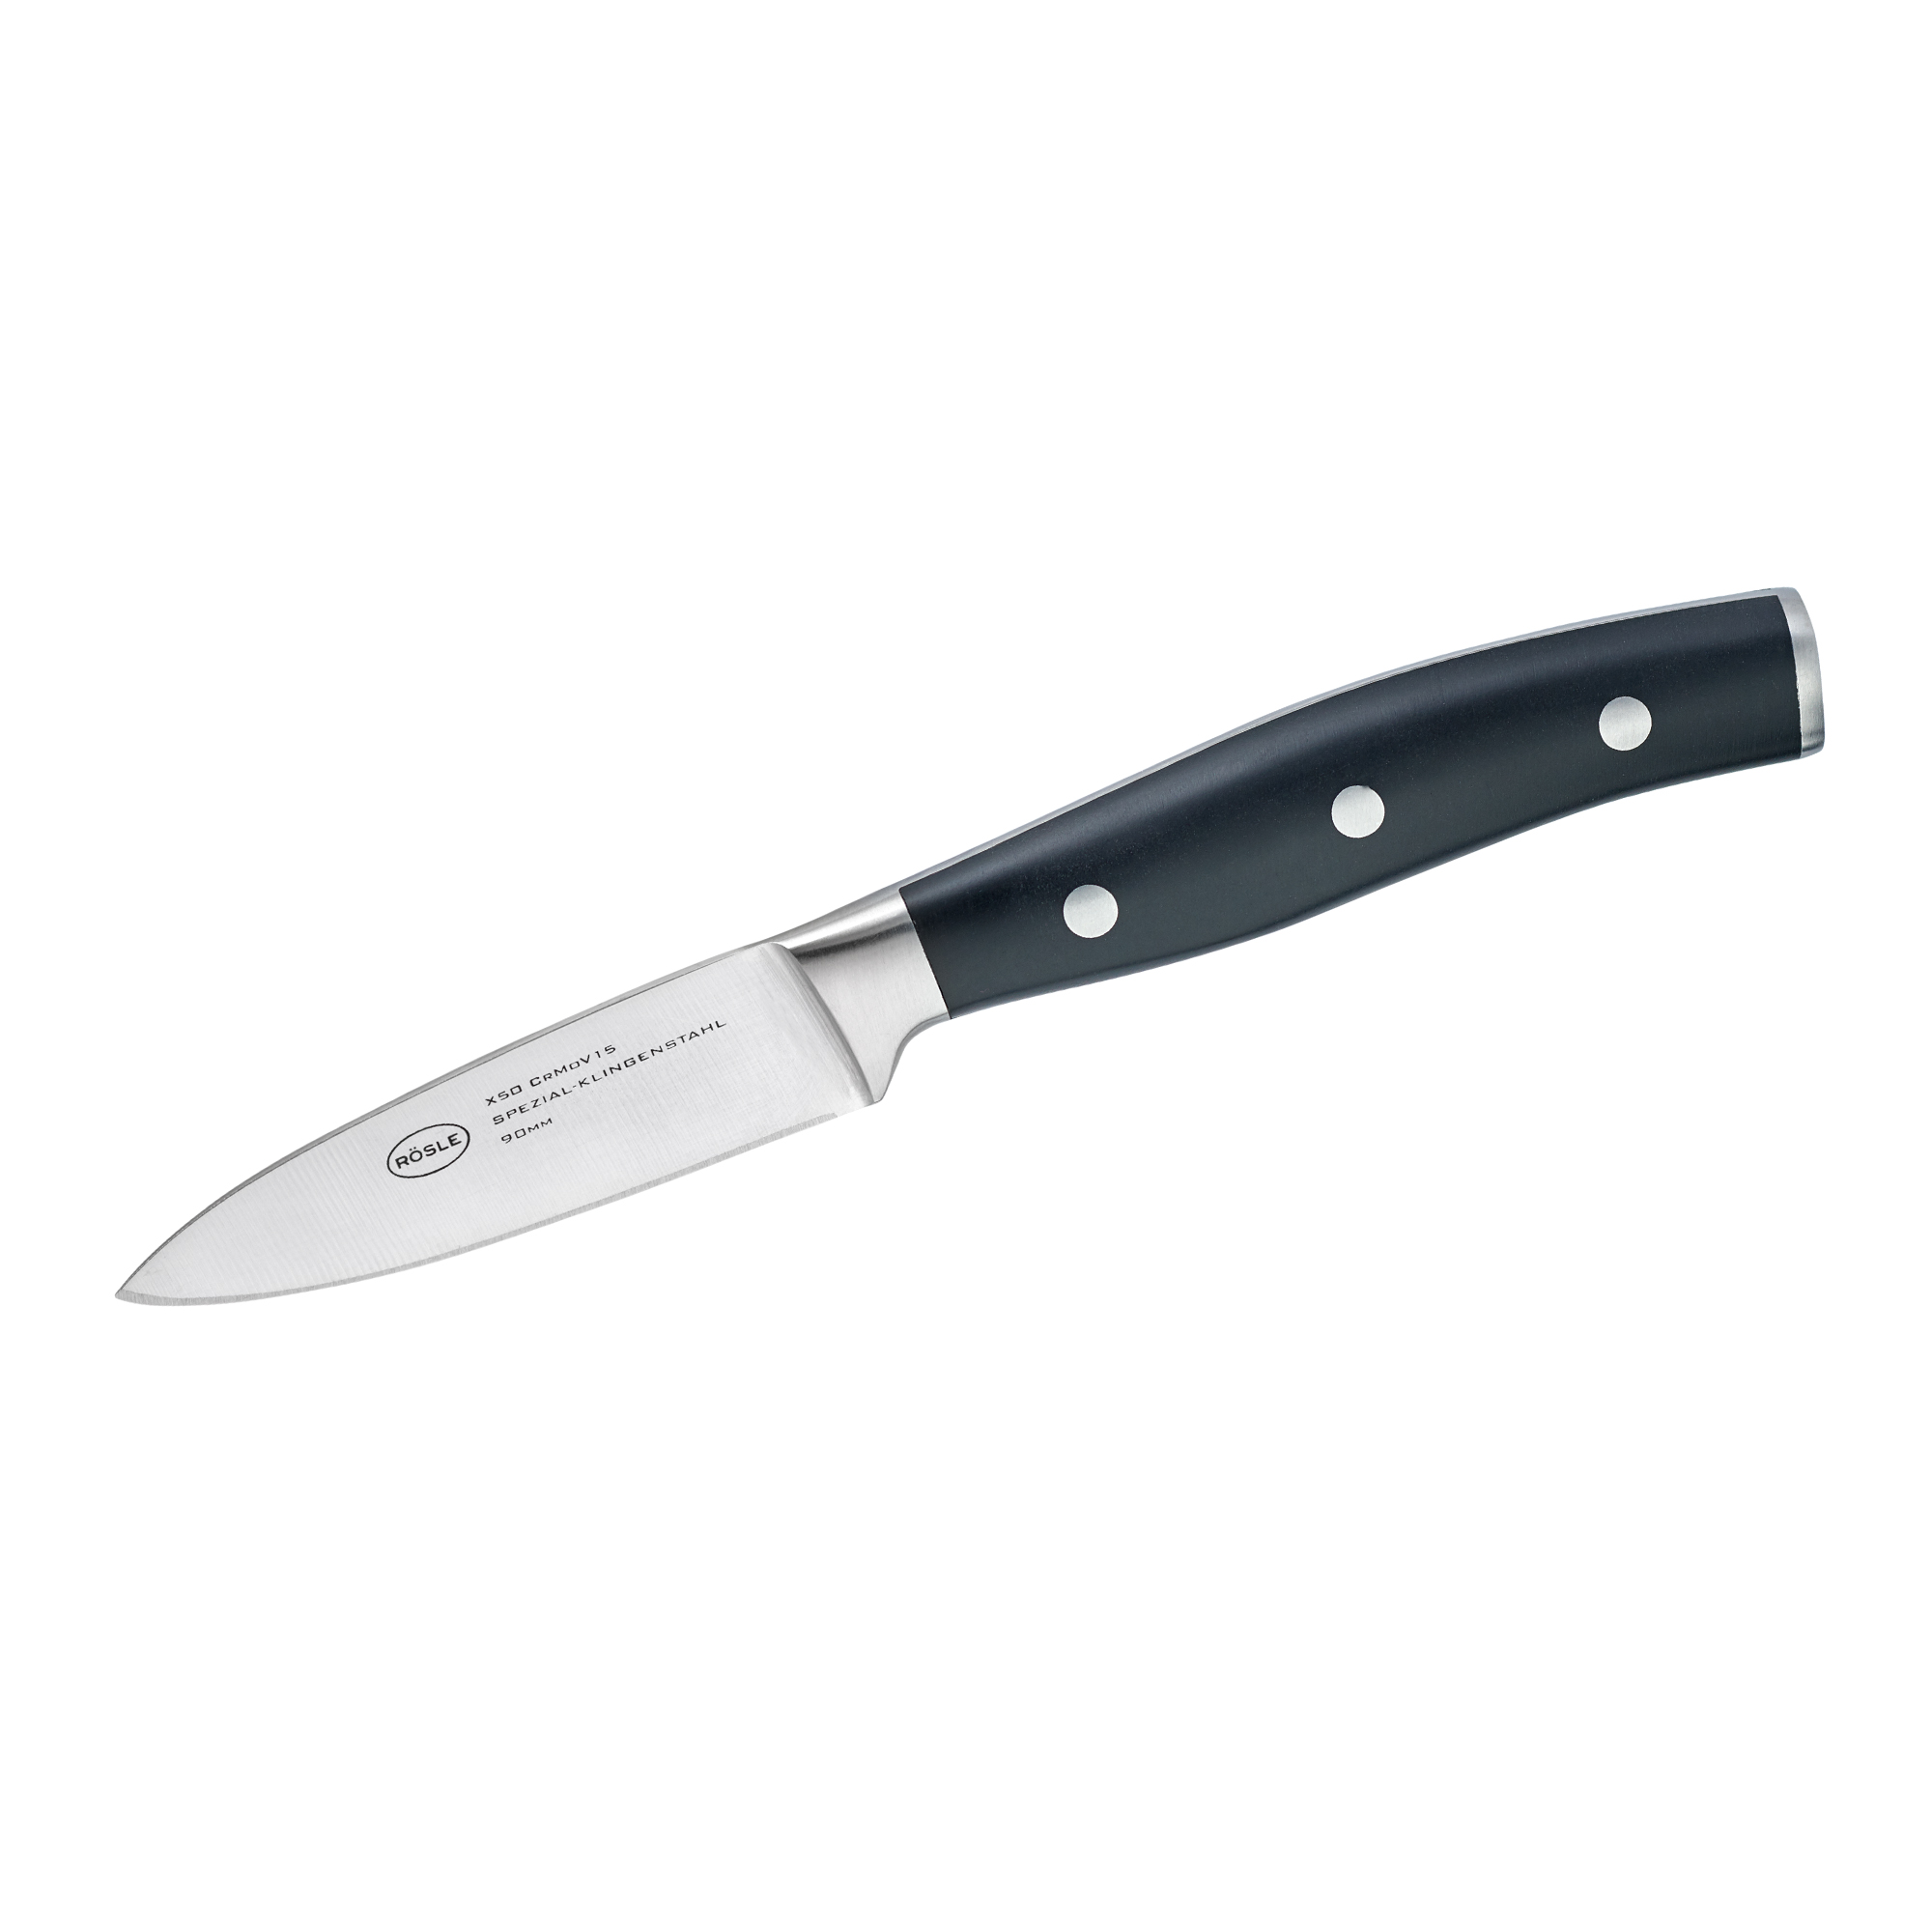 Utility knife Tradition 9 cm